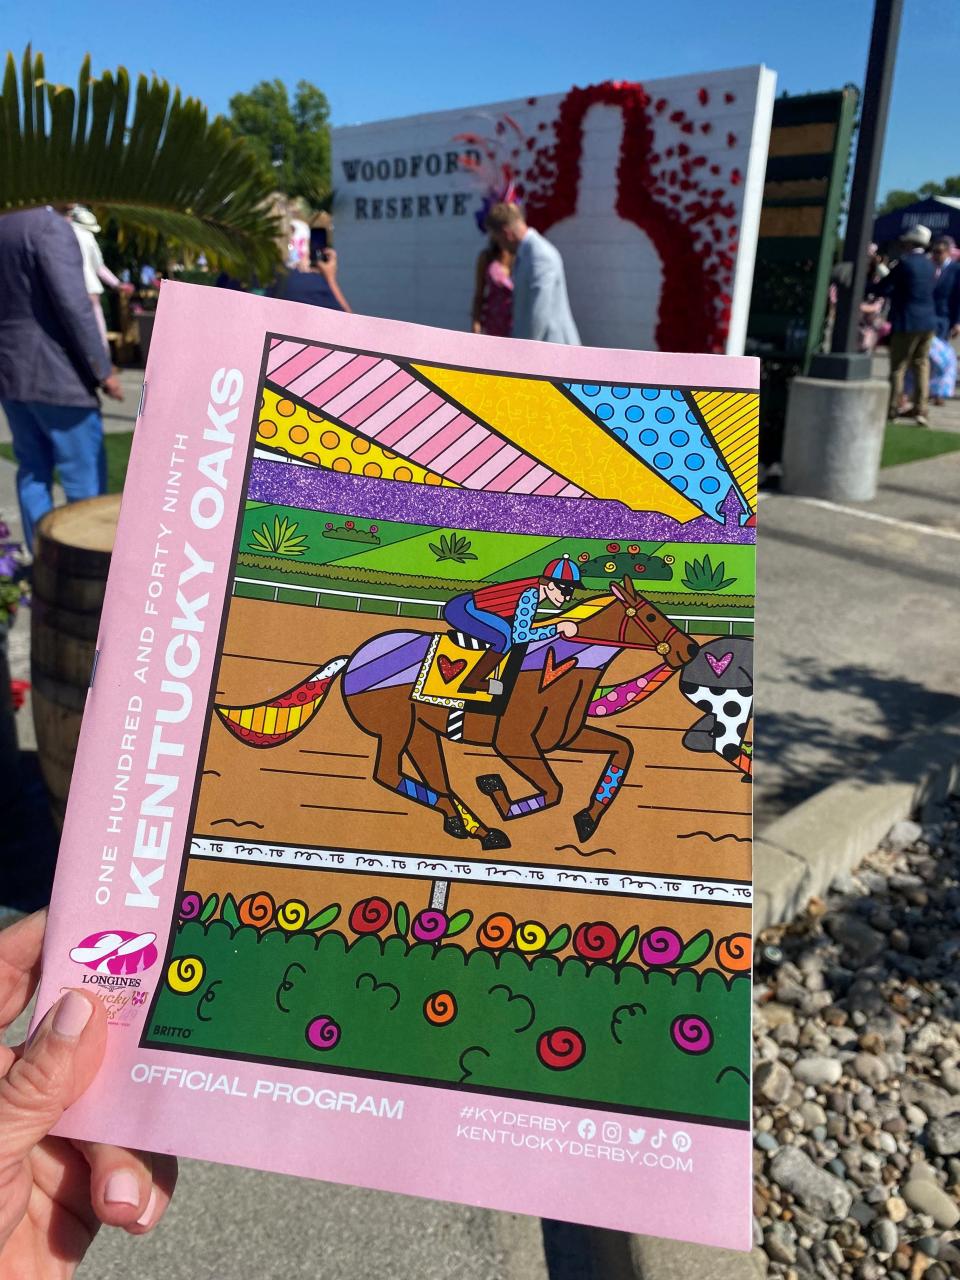 The program for the 2023 Kentucky Oaks was designed by Brazilian artist Romero Britto. May 5, 2023